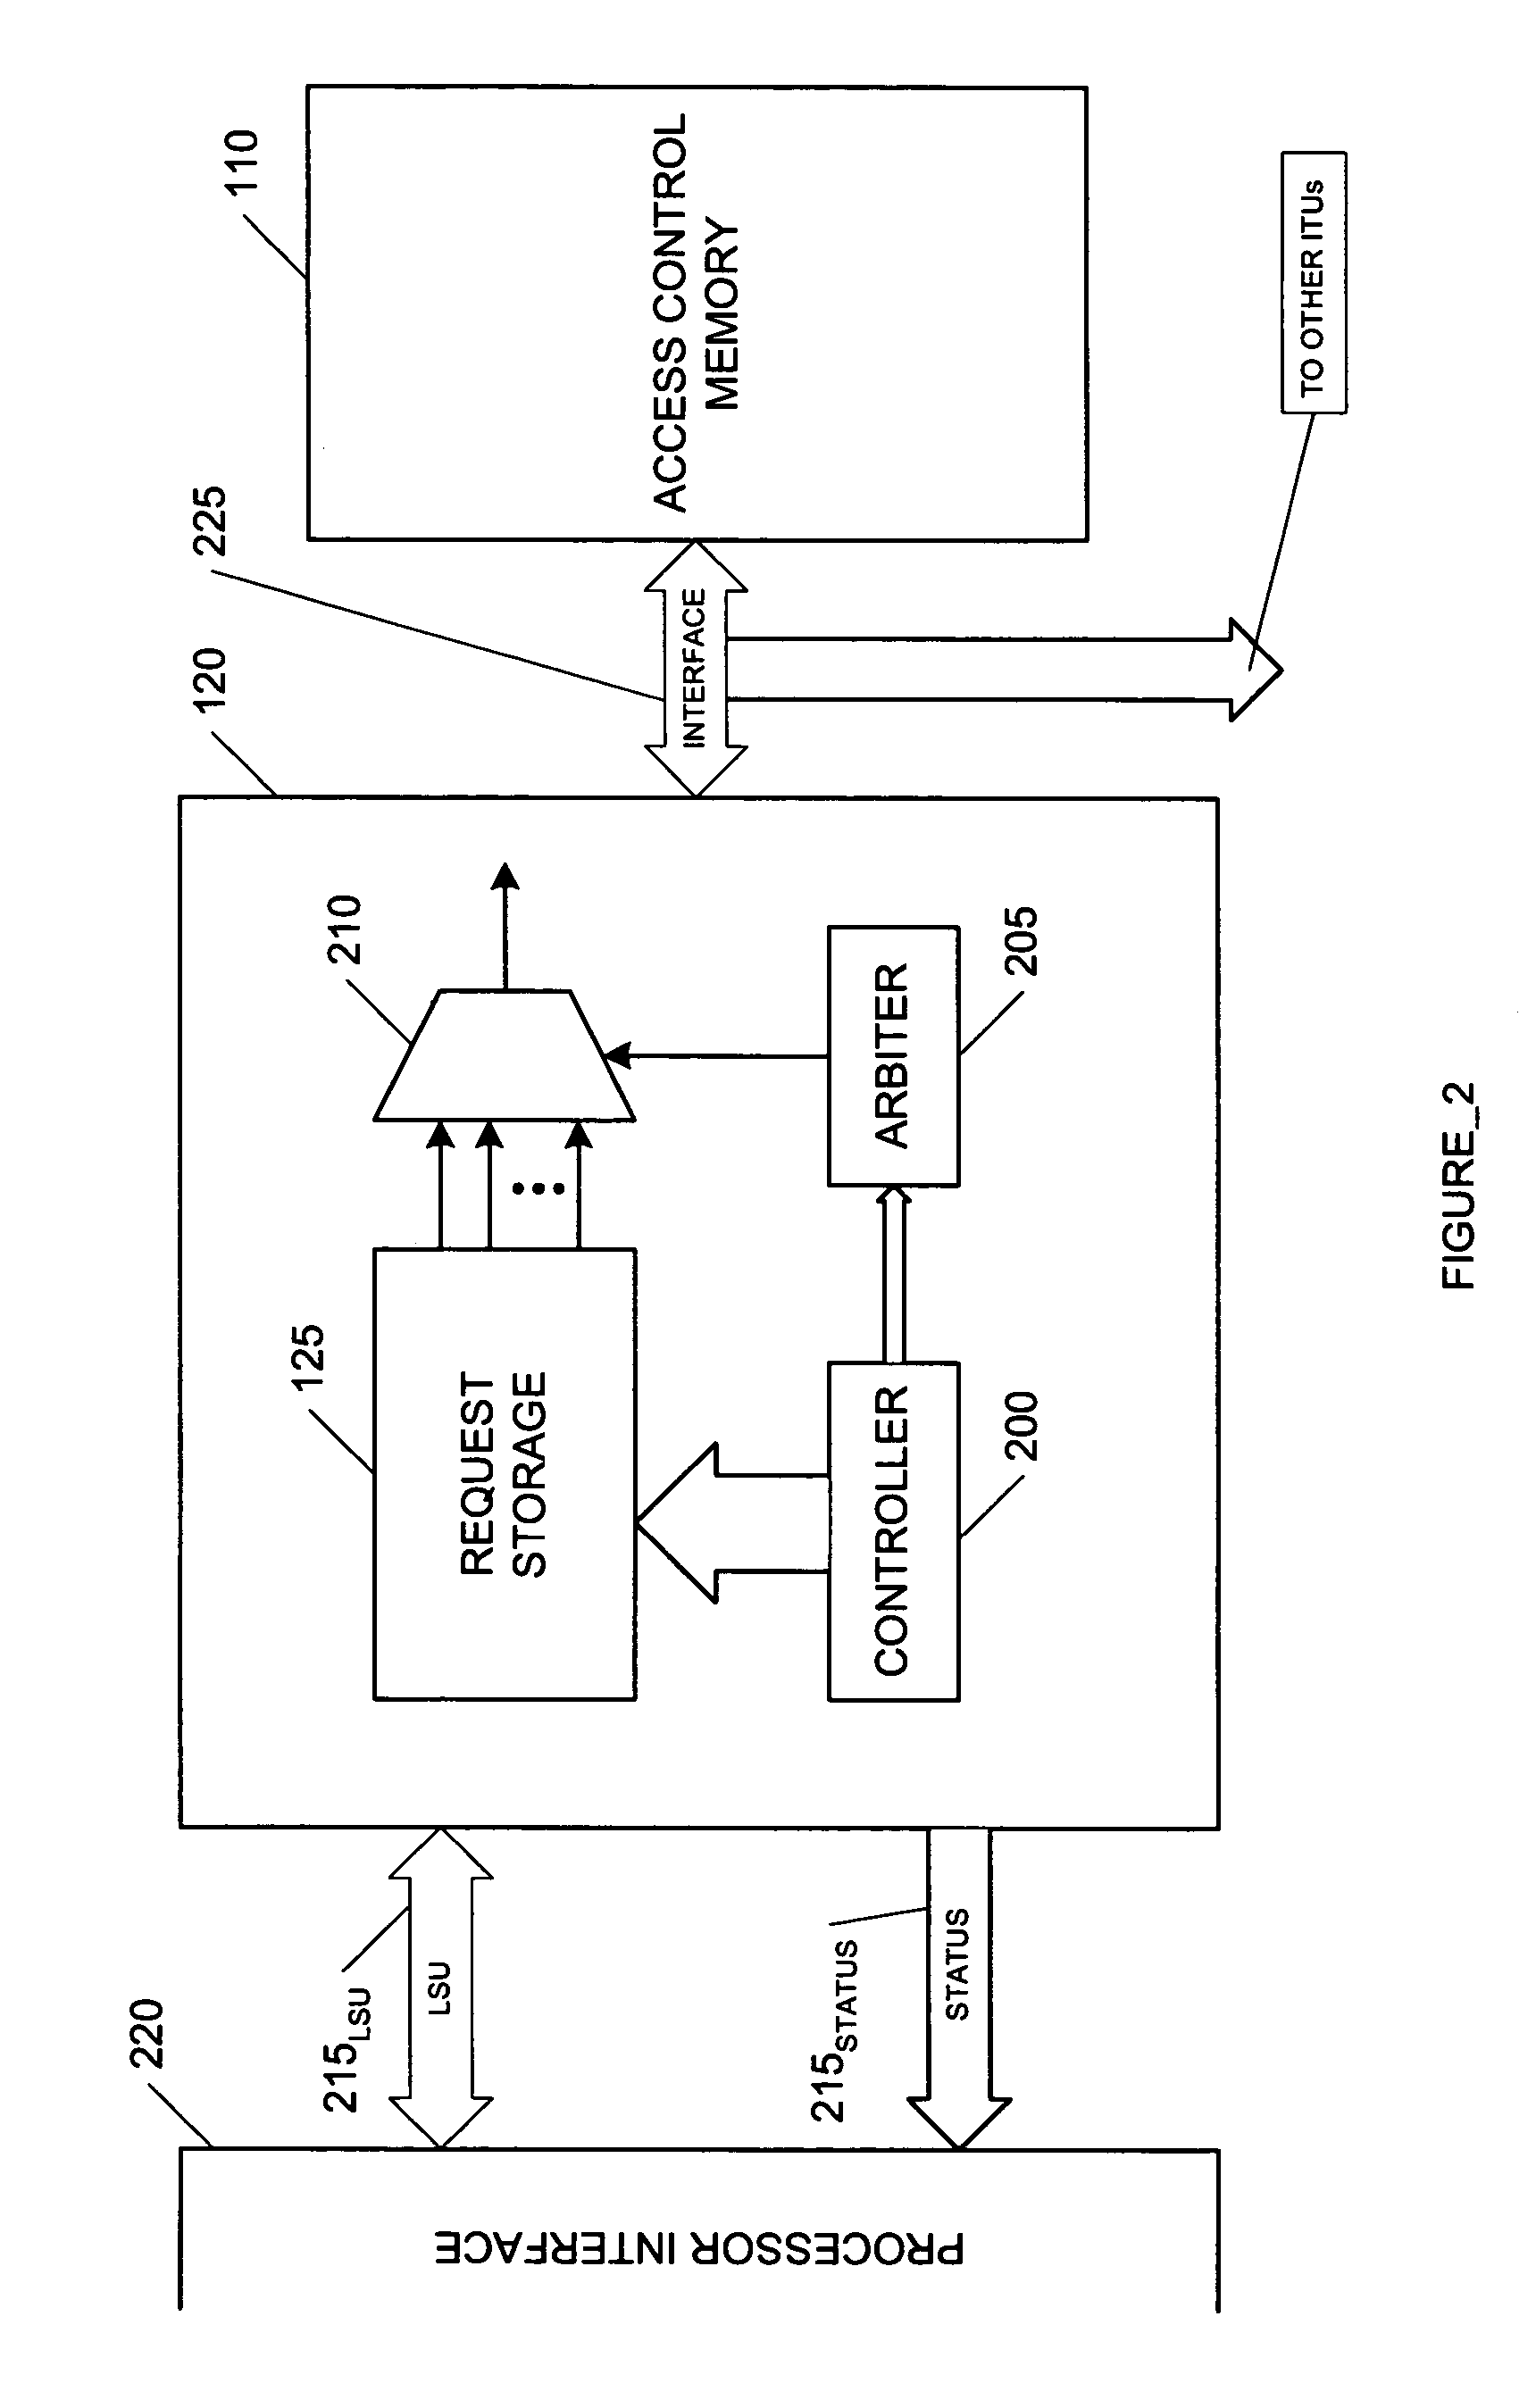 Smart memory based synchronization controller for a multi-threaded multiprocessor SoC